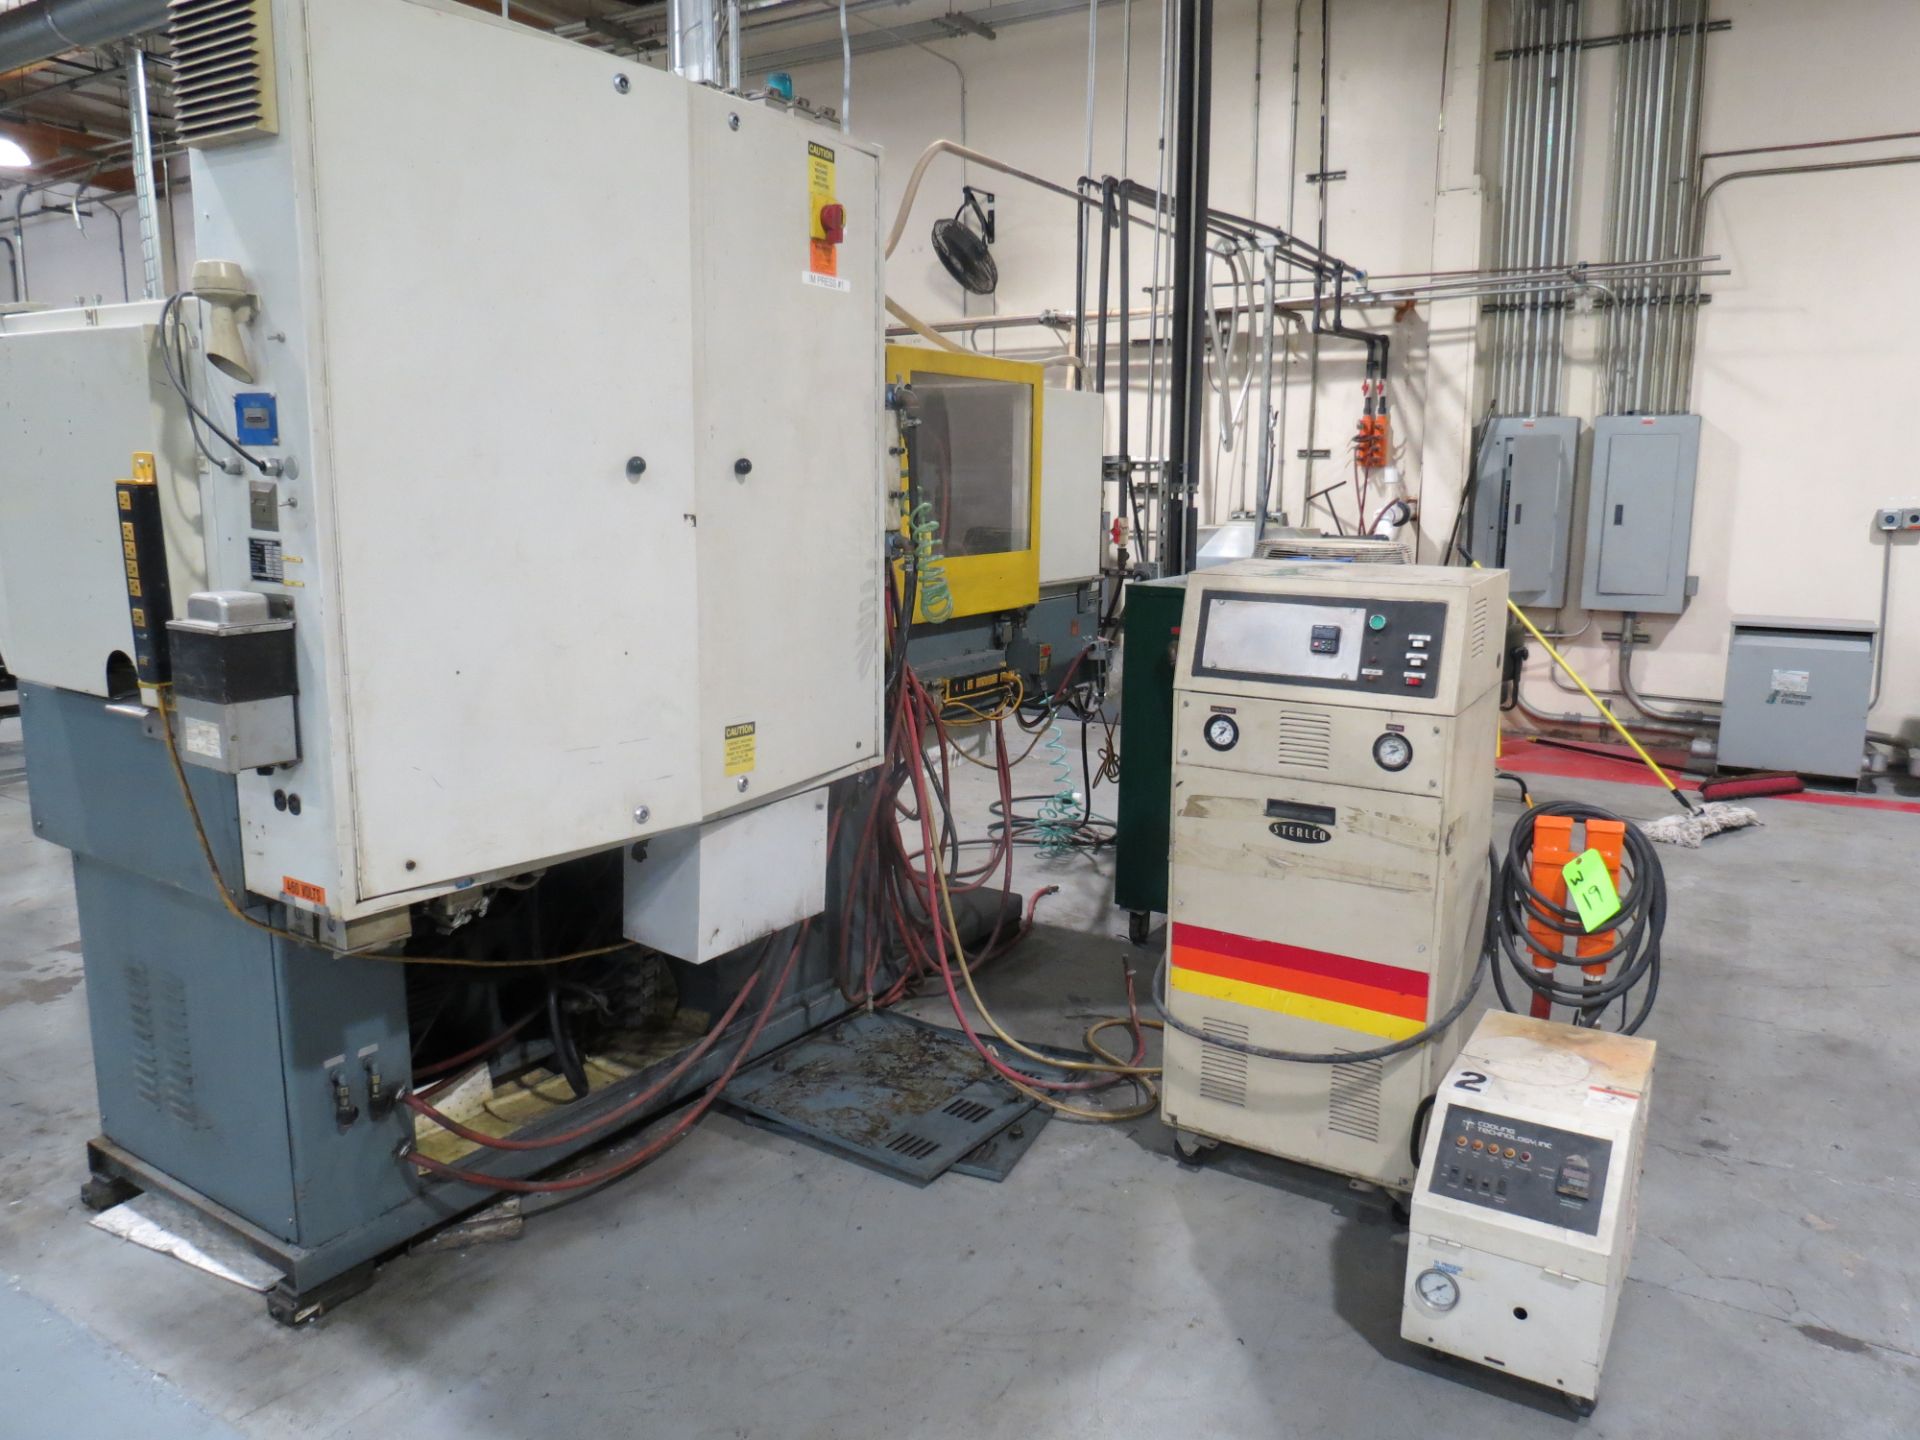 Battenfeld BA 350 CD Plus Injection Molding Machine with Stelco Air Dryer & IMS Portable Chiller - Image 5 of 12